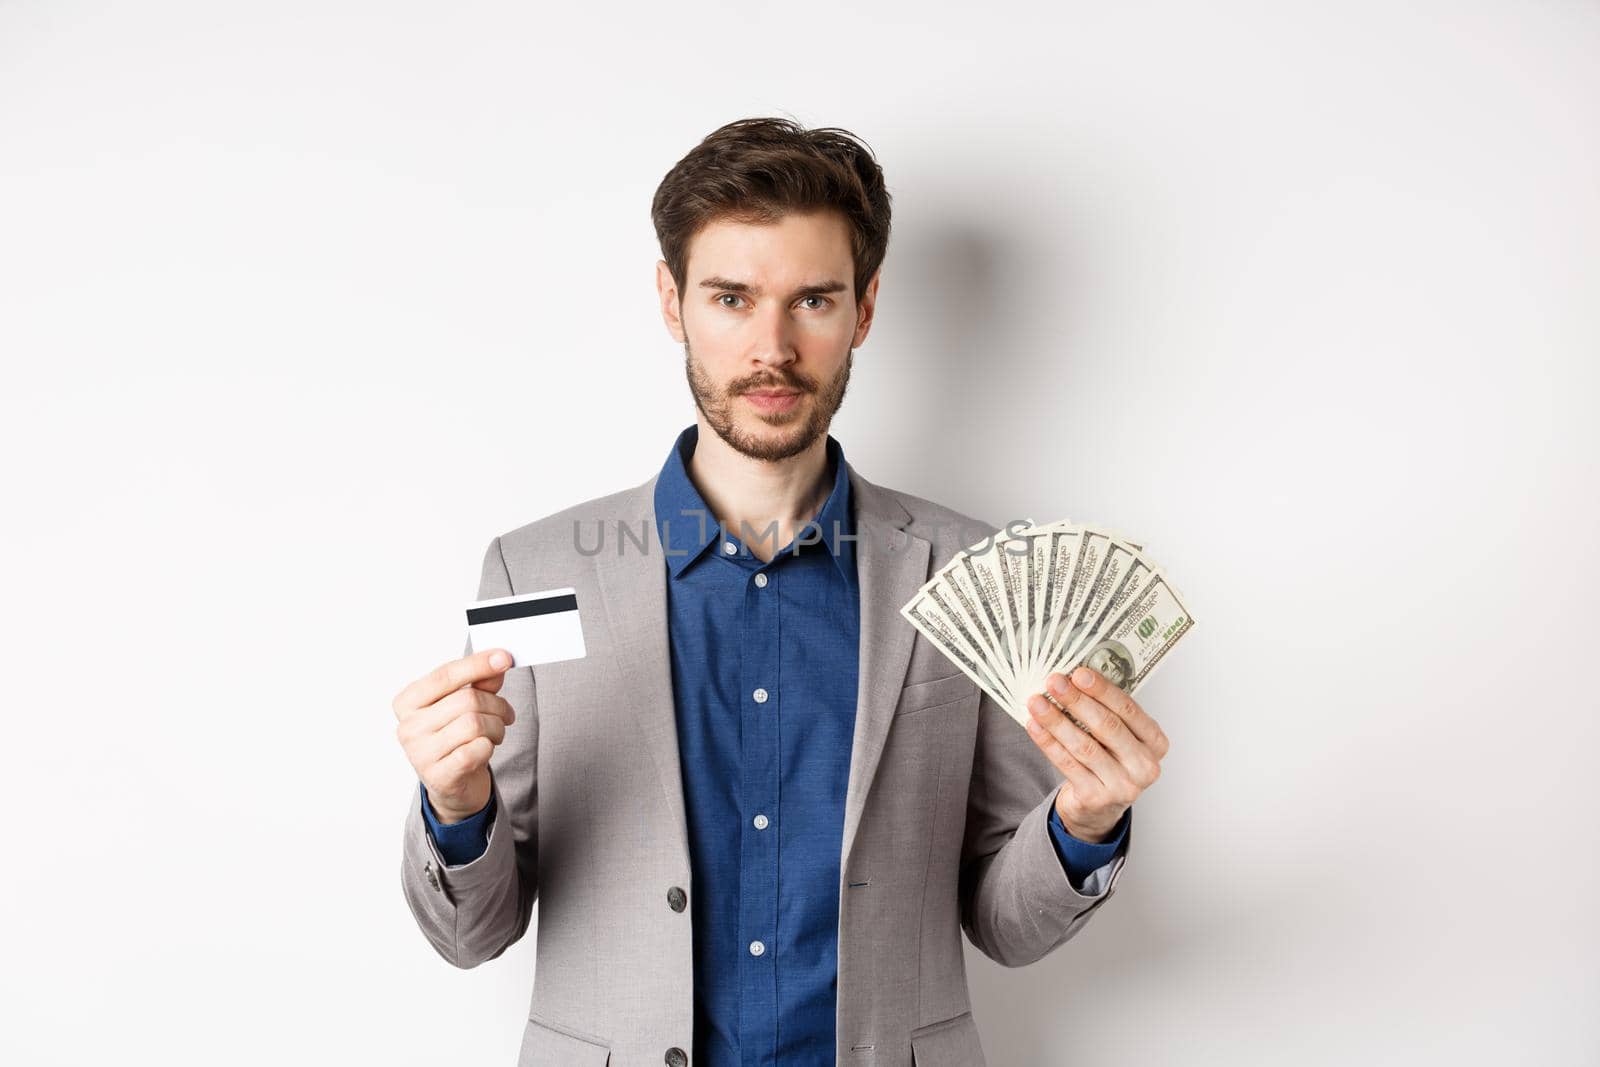 Successful businessman making money, standing in suit with dollar bills and plastic credit card, white background.